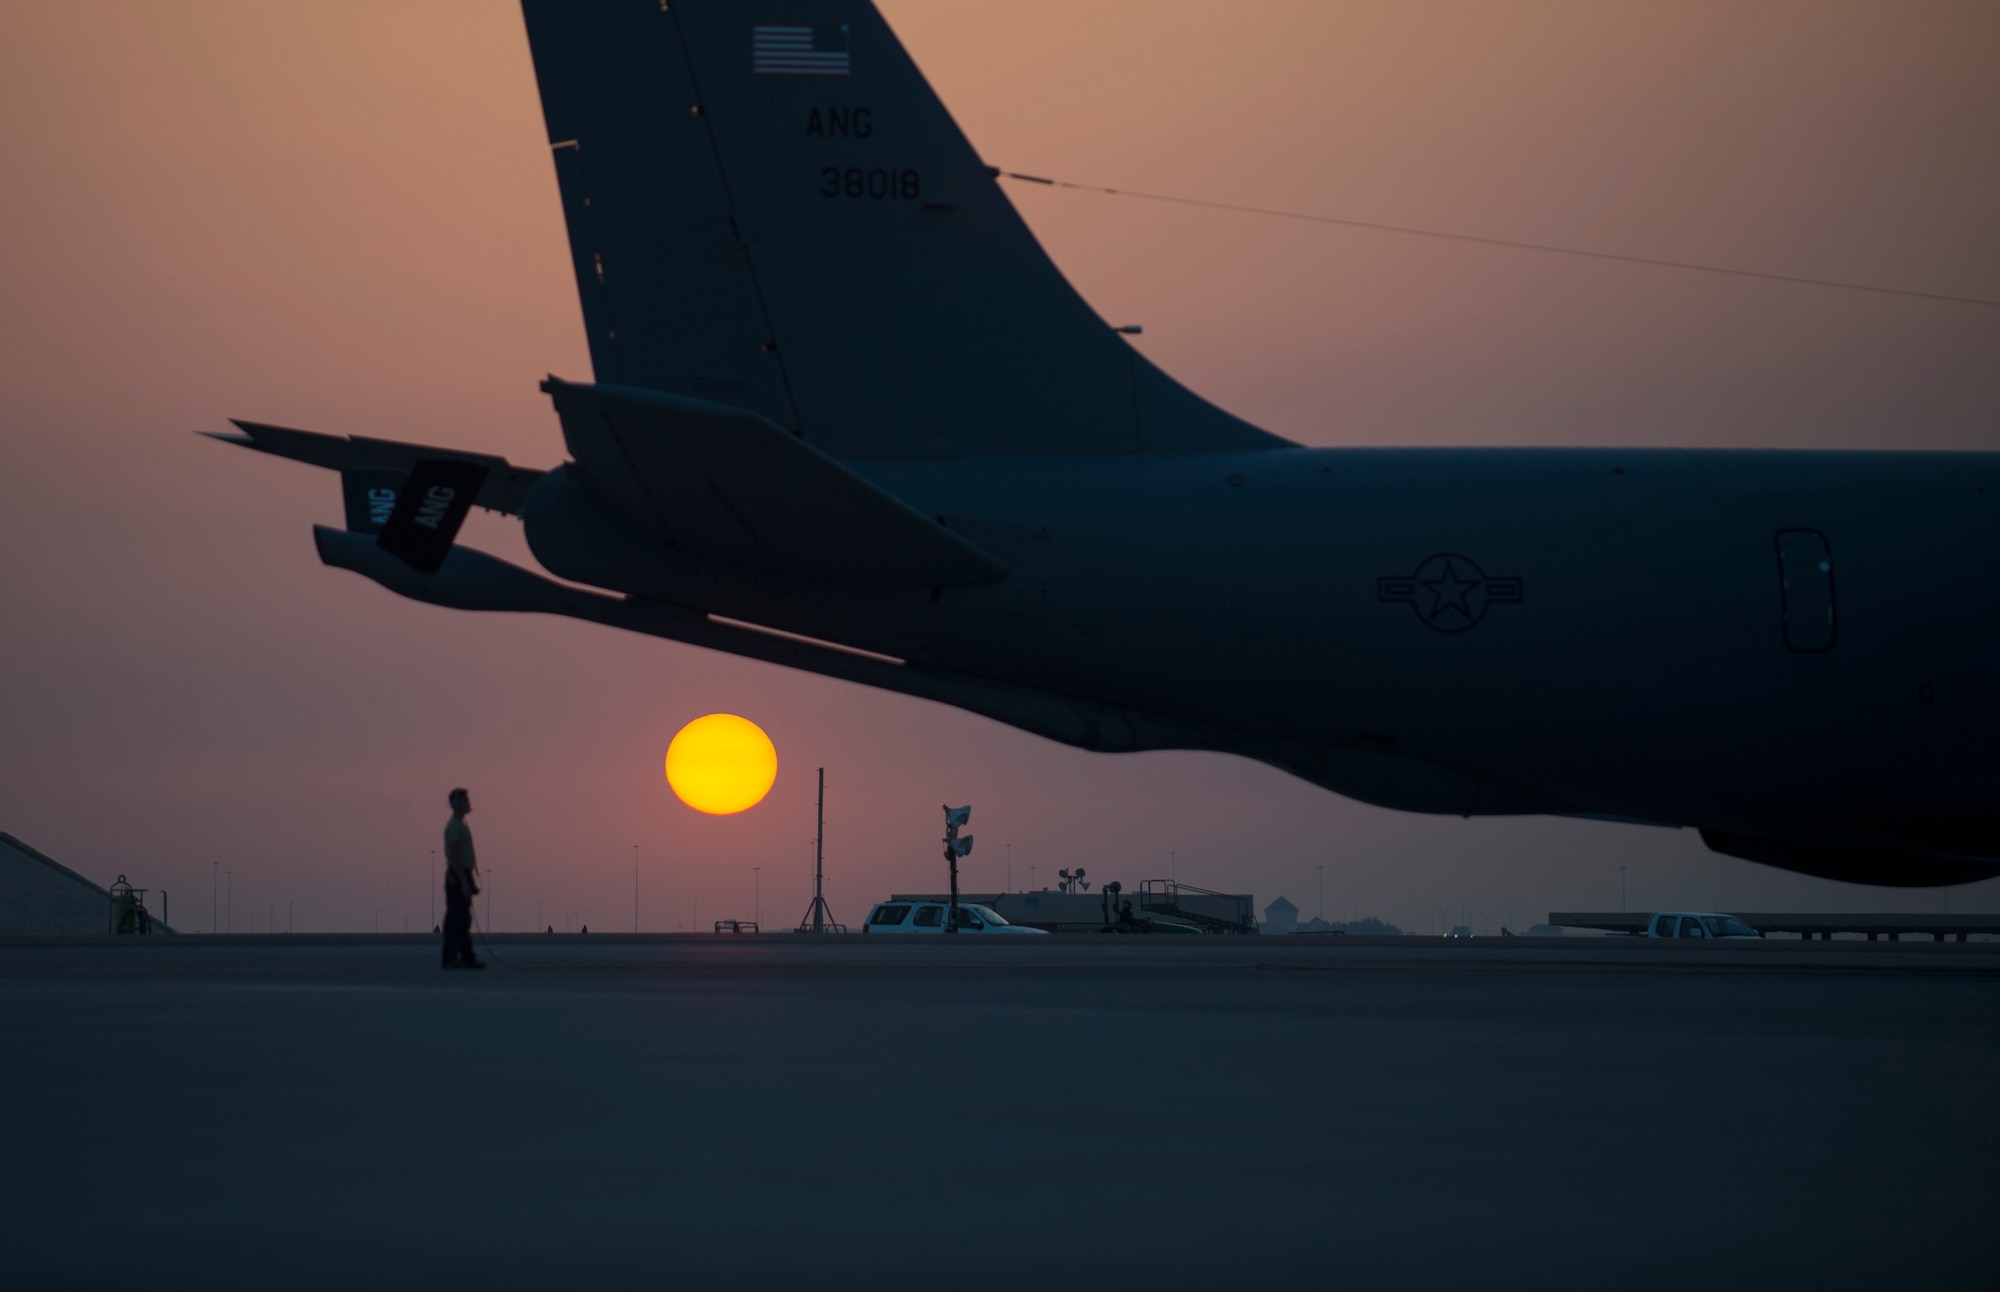 A U.S. Air Force Airman with the 379th Expeditionary Aircraft Maintenance Squadron wait to conduct a pre-flight check on a KC-135 Stratotanker at Al Udeid Air Base, Qatar, June 8, 2017. The inspection being performed on one of the KC-135 Stratotanker is accomplished on a regular schedule in order keep the aircraft mission ready. (U.S. Air Force photo by Tech. Sgt. Amy M. Lovgren)